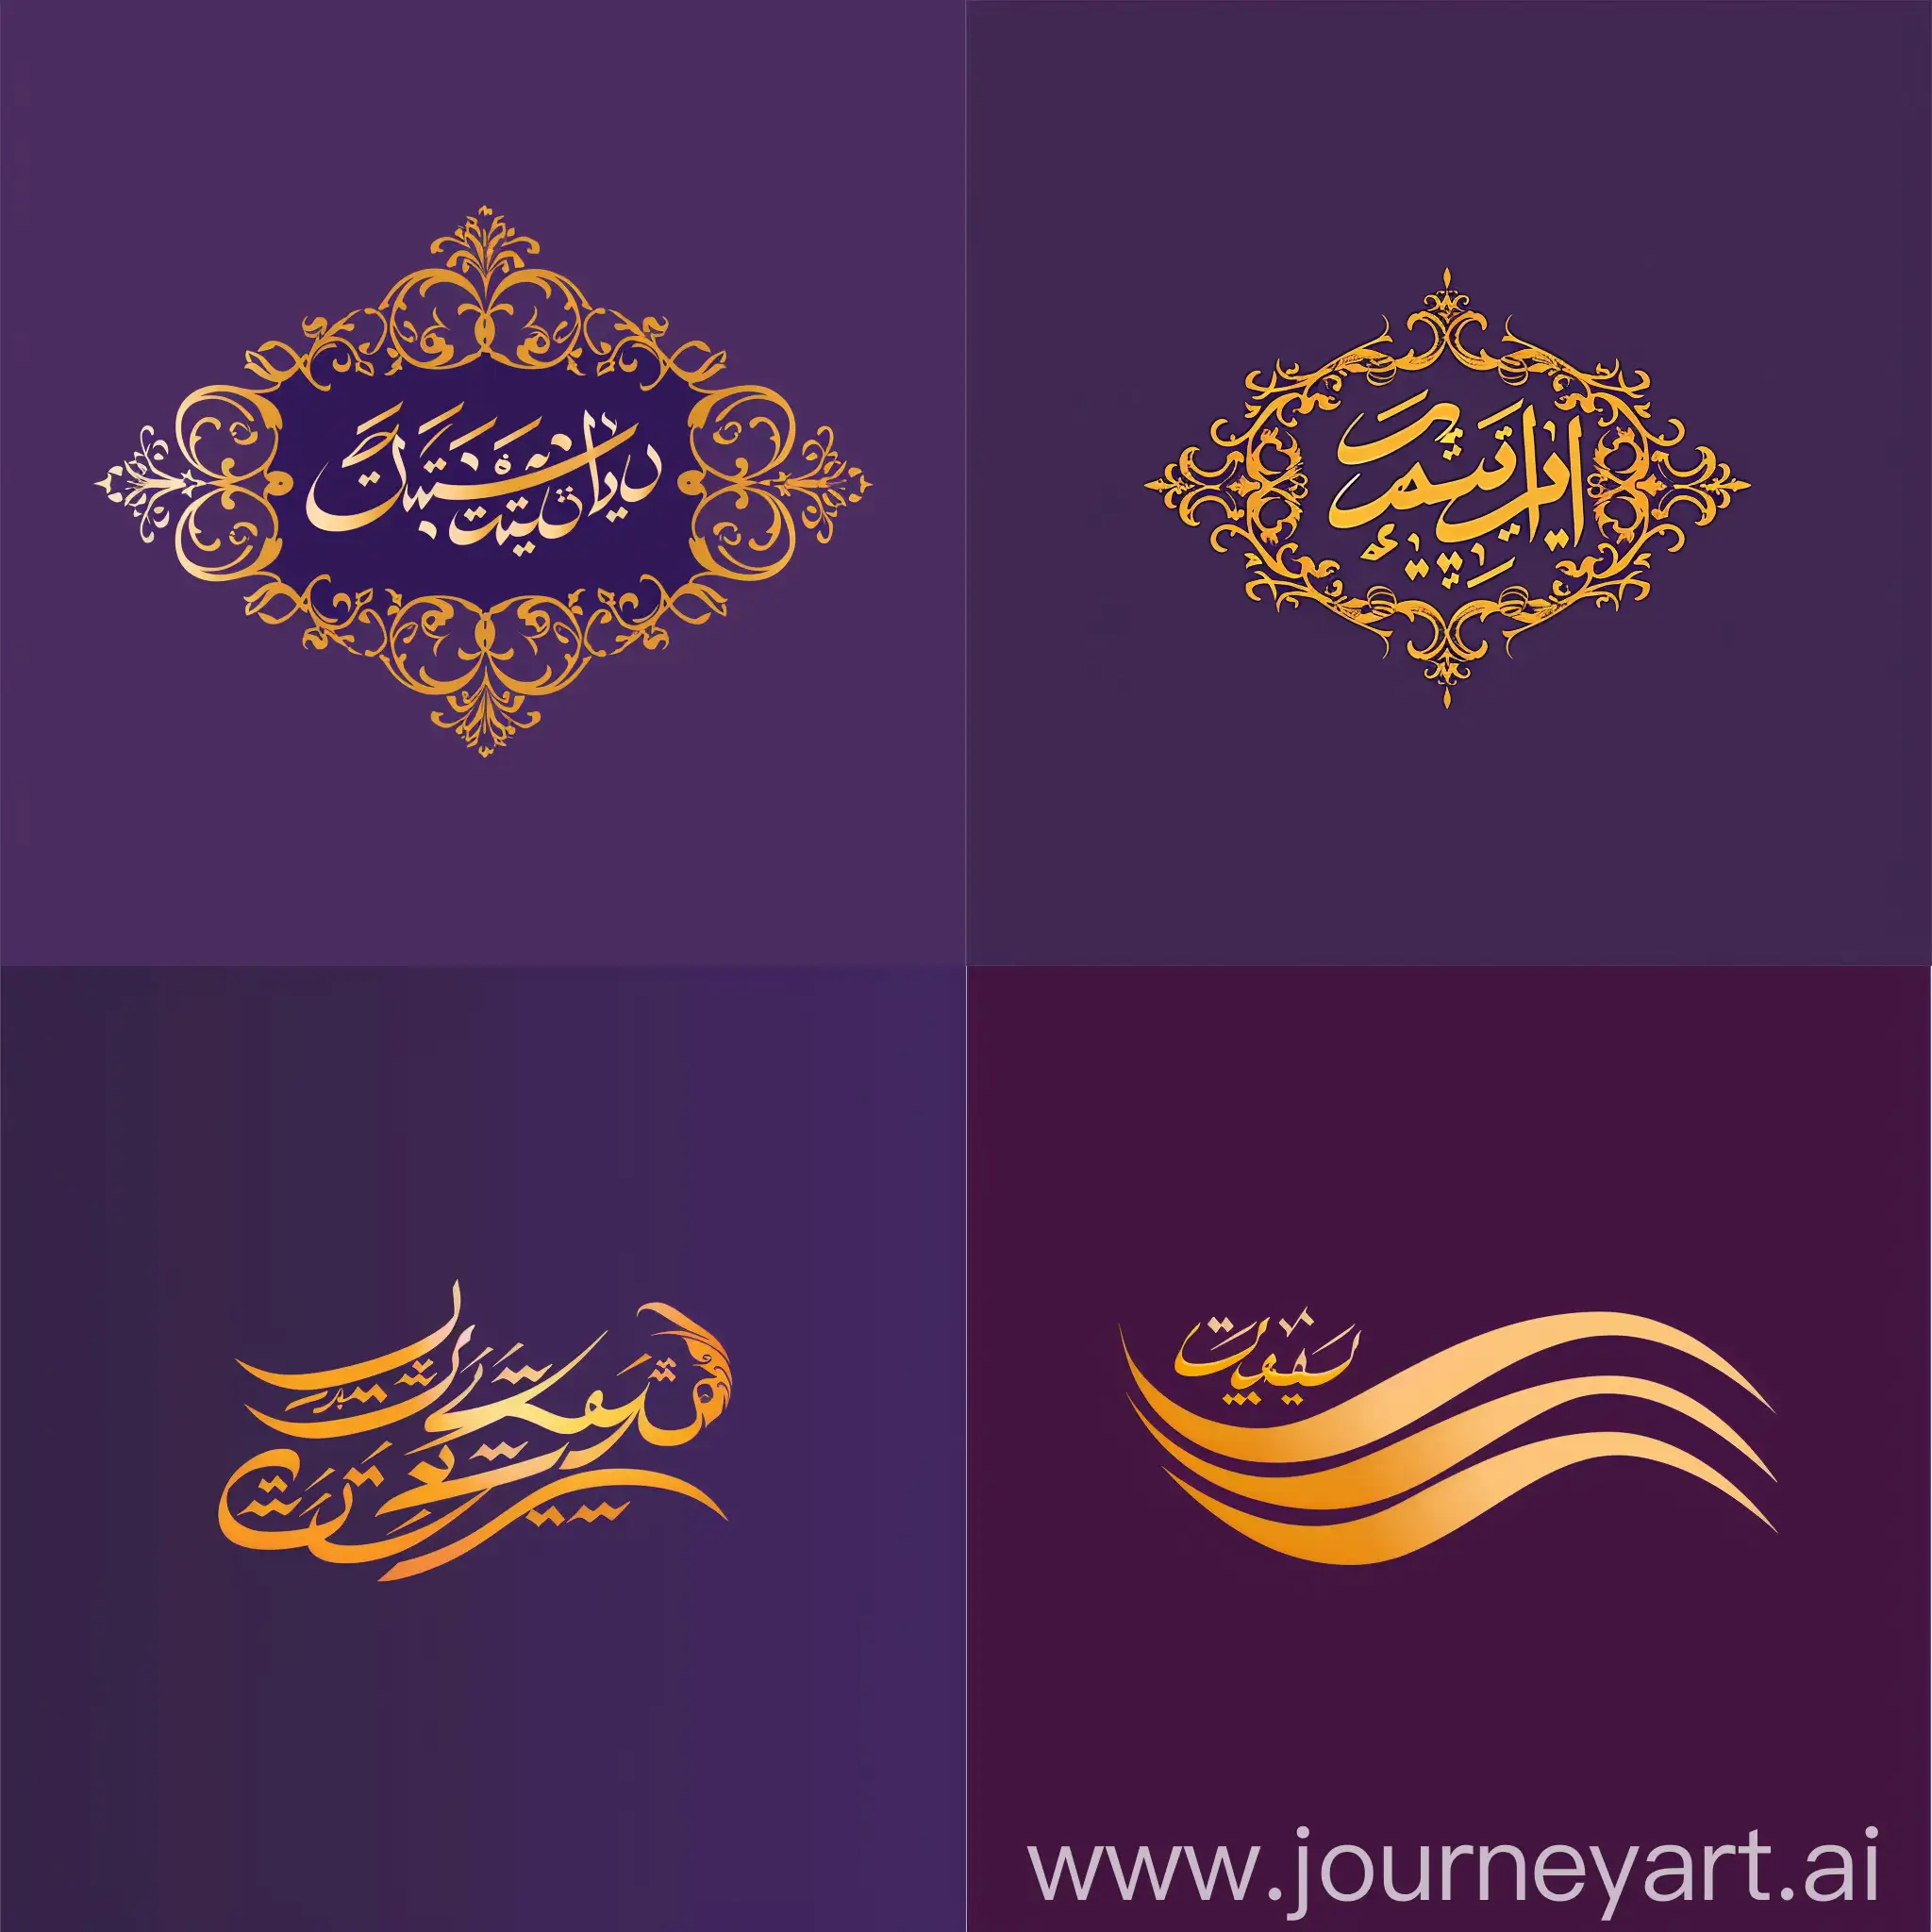 Luxurious-Persian-Text-Logo-Design-on-Golden-and-Purple-Background